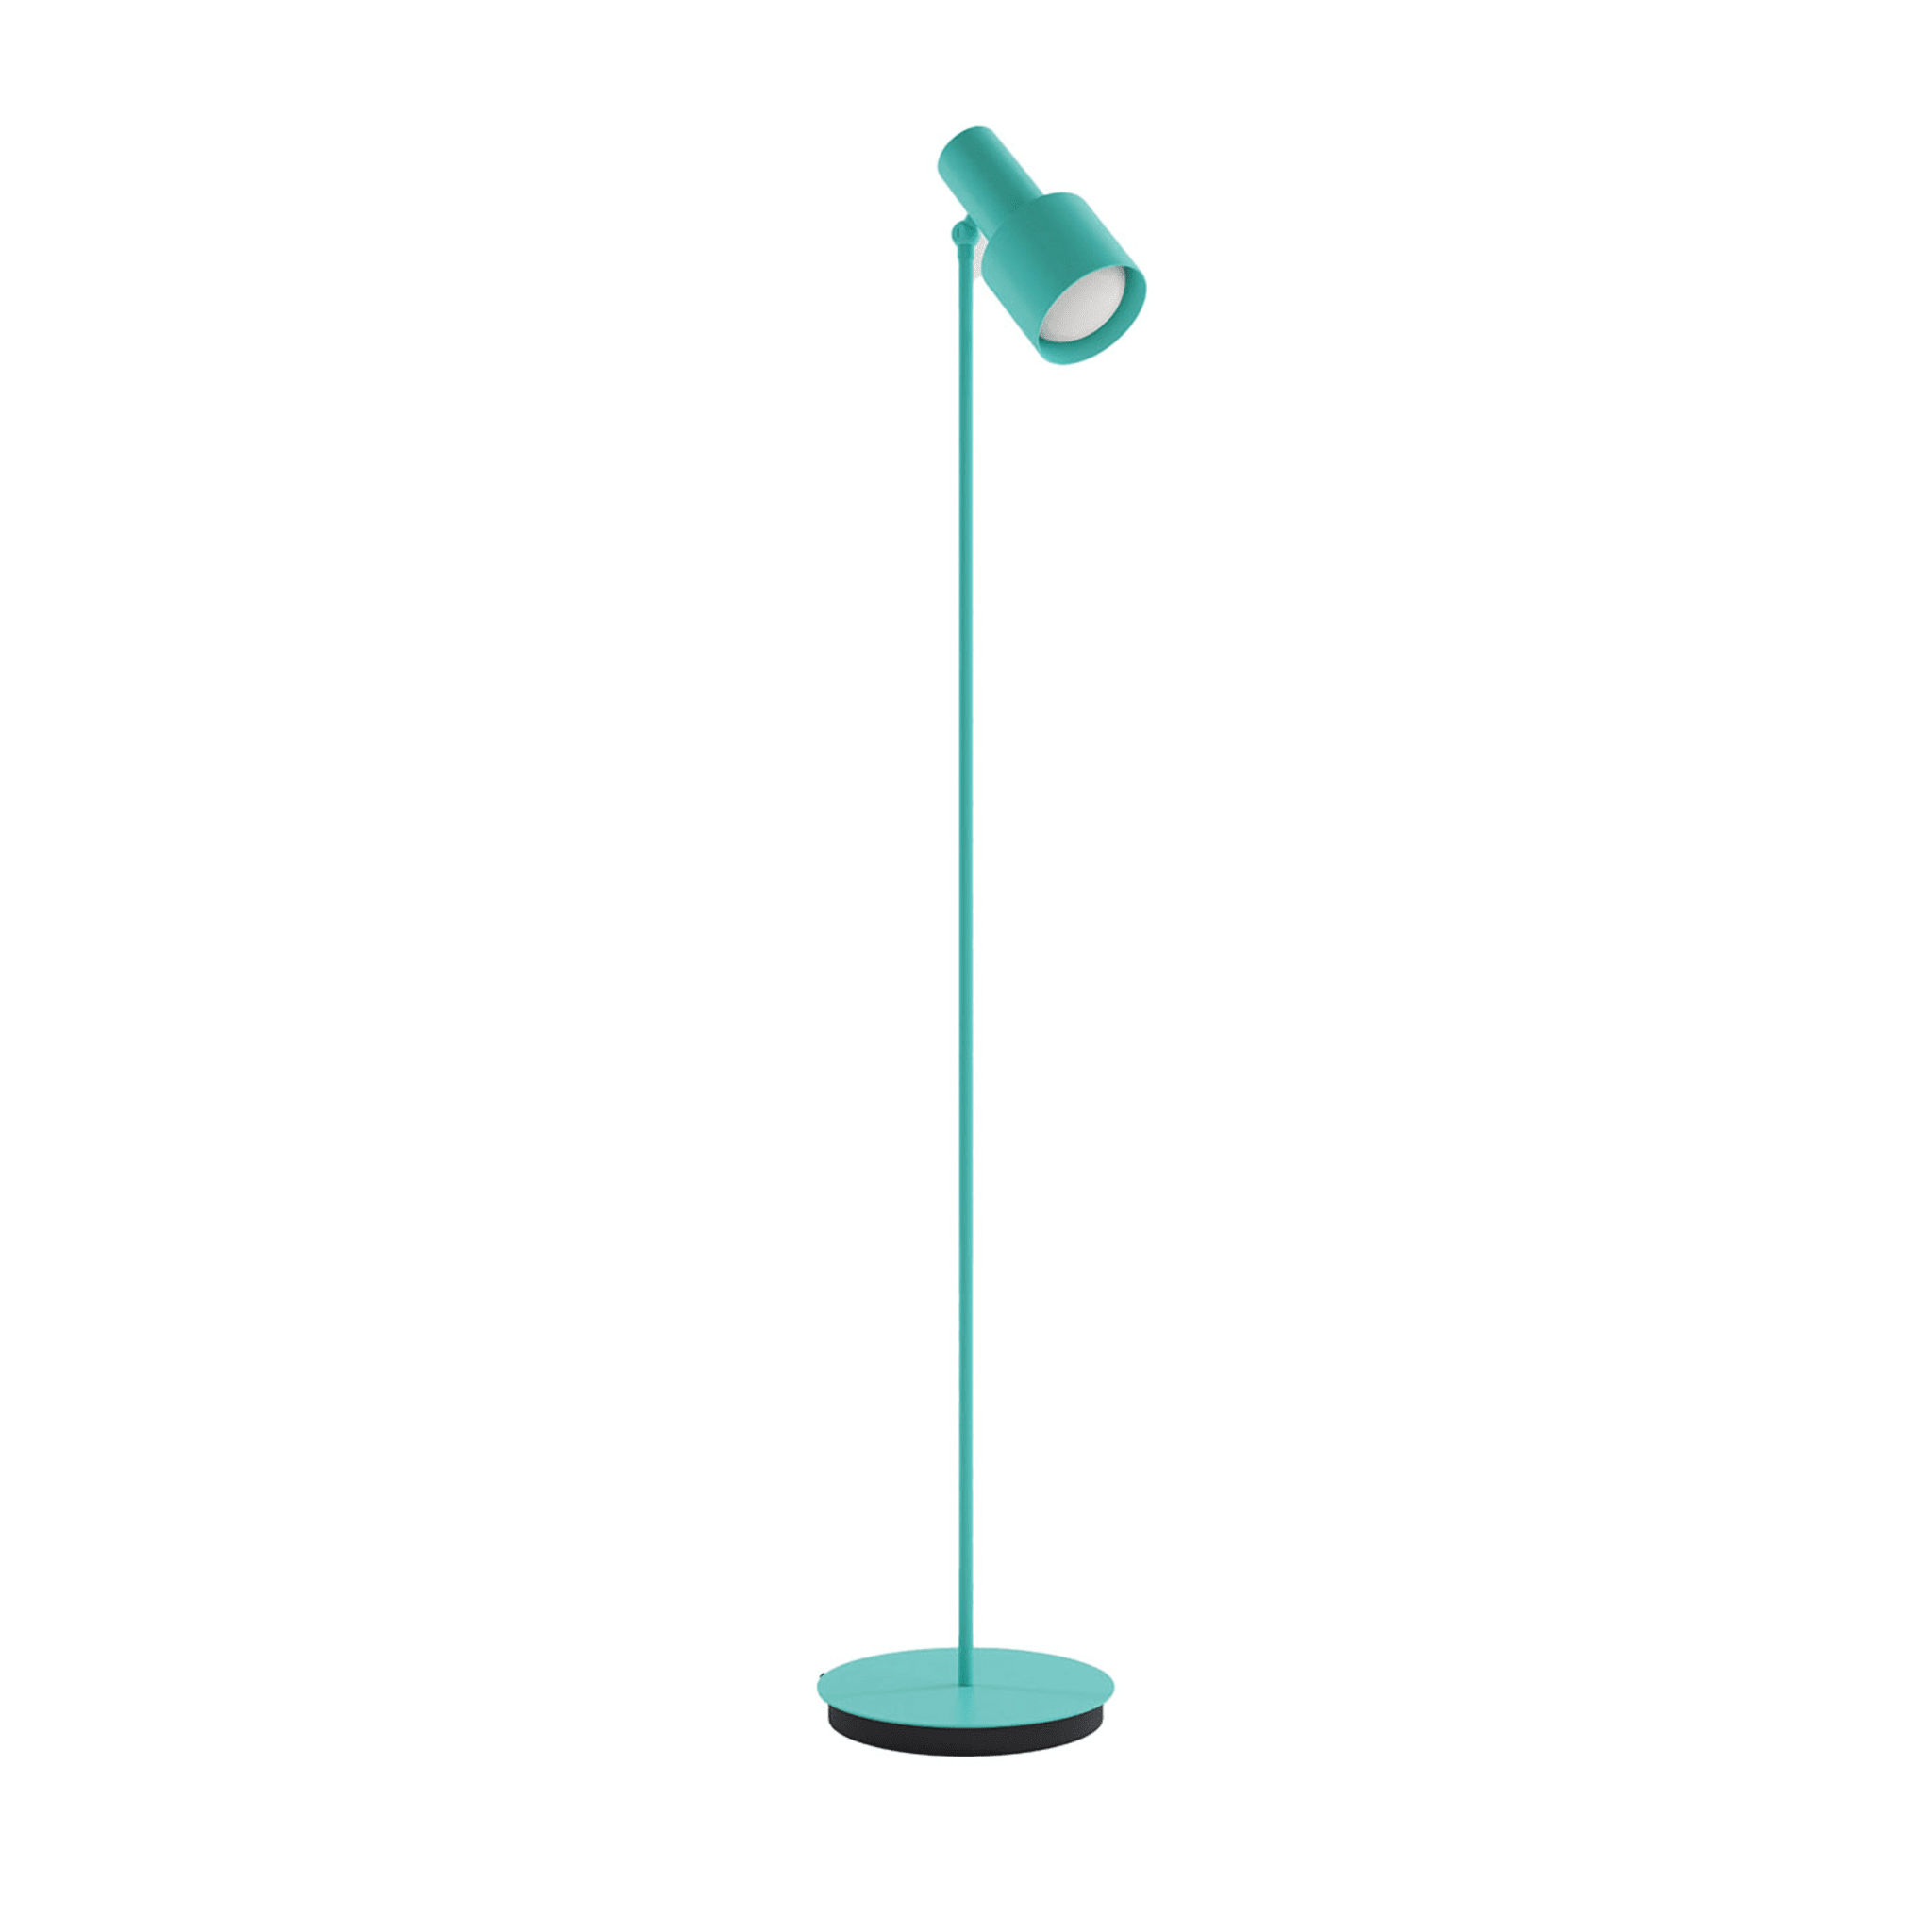 Light Gallery Luxury GP Light-Green Floor Lamp by Marco Pollice - Main view